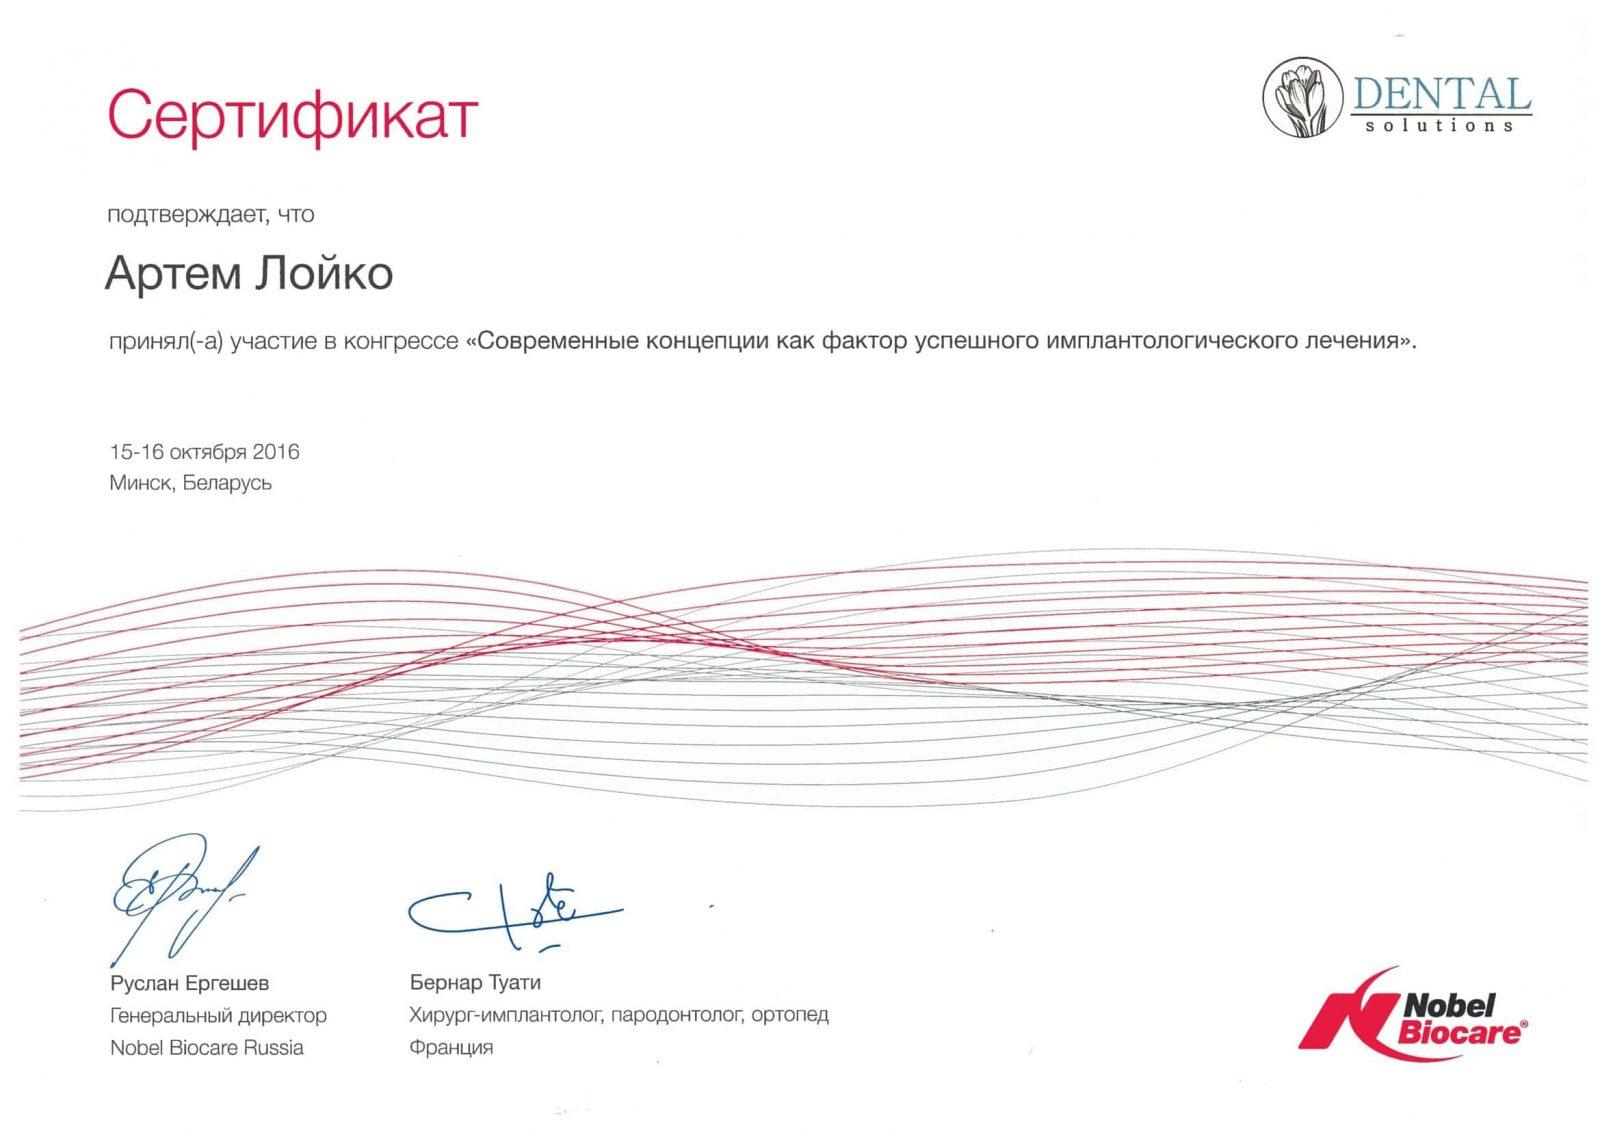 Nobel Biocare certificate was issued to Artem Loiko on the successful completion of the course. Modern concepts as a factor in successful implant treatment.